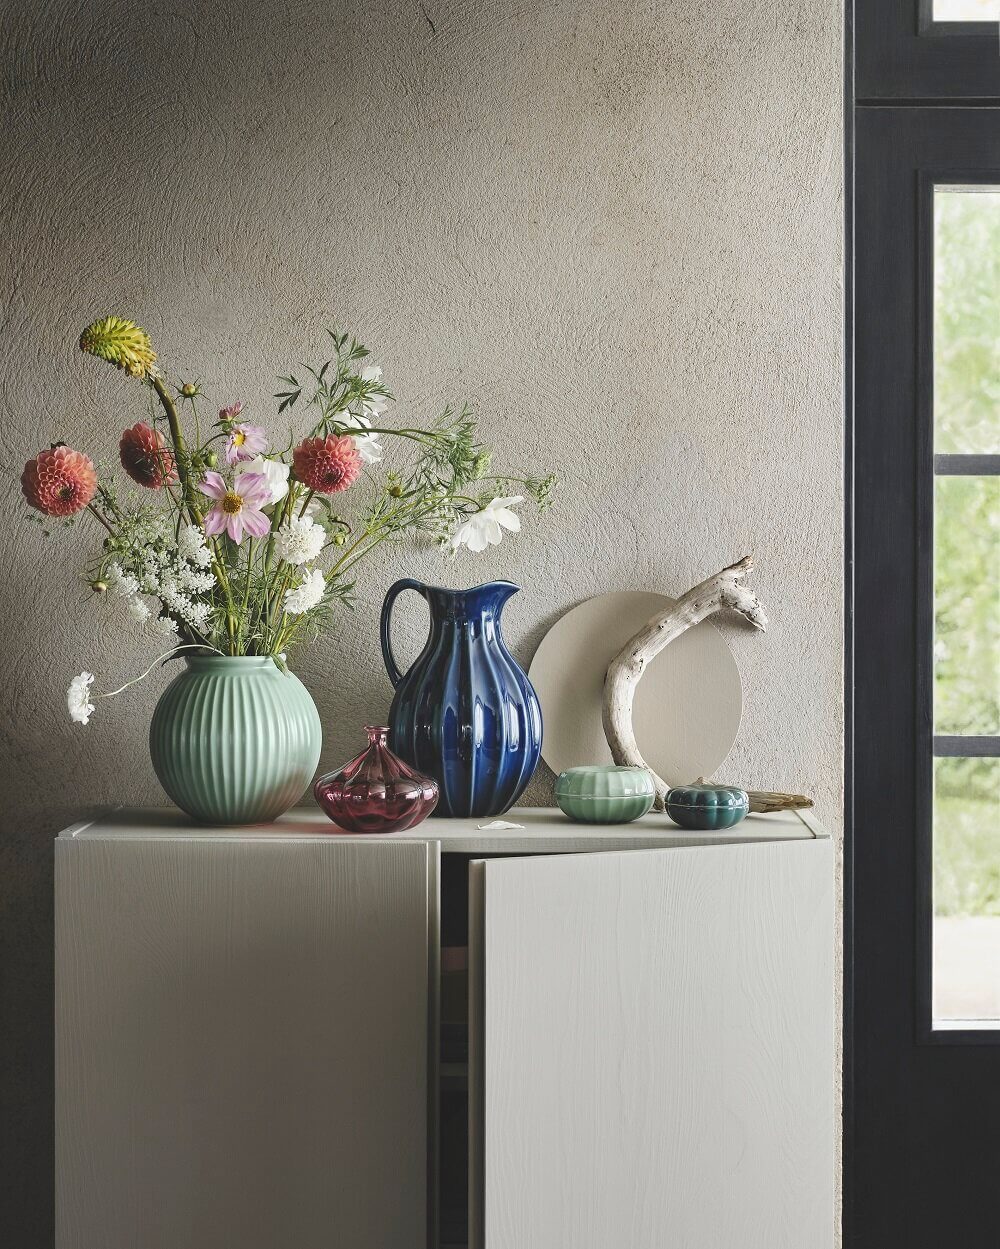 ikea spring collection 2020 mindful living nordroom16 IKEA Spring Collection 2020: Mindful Living and Close to Nature